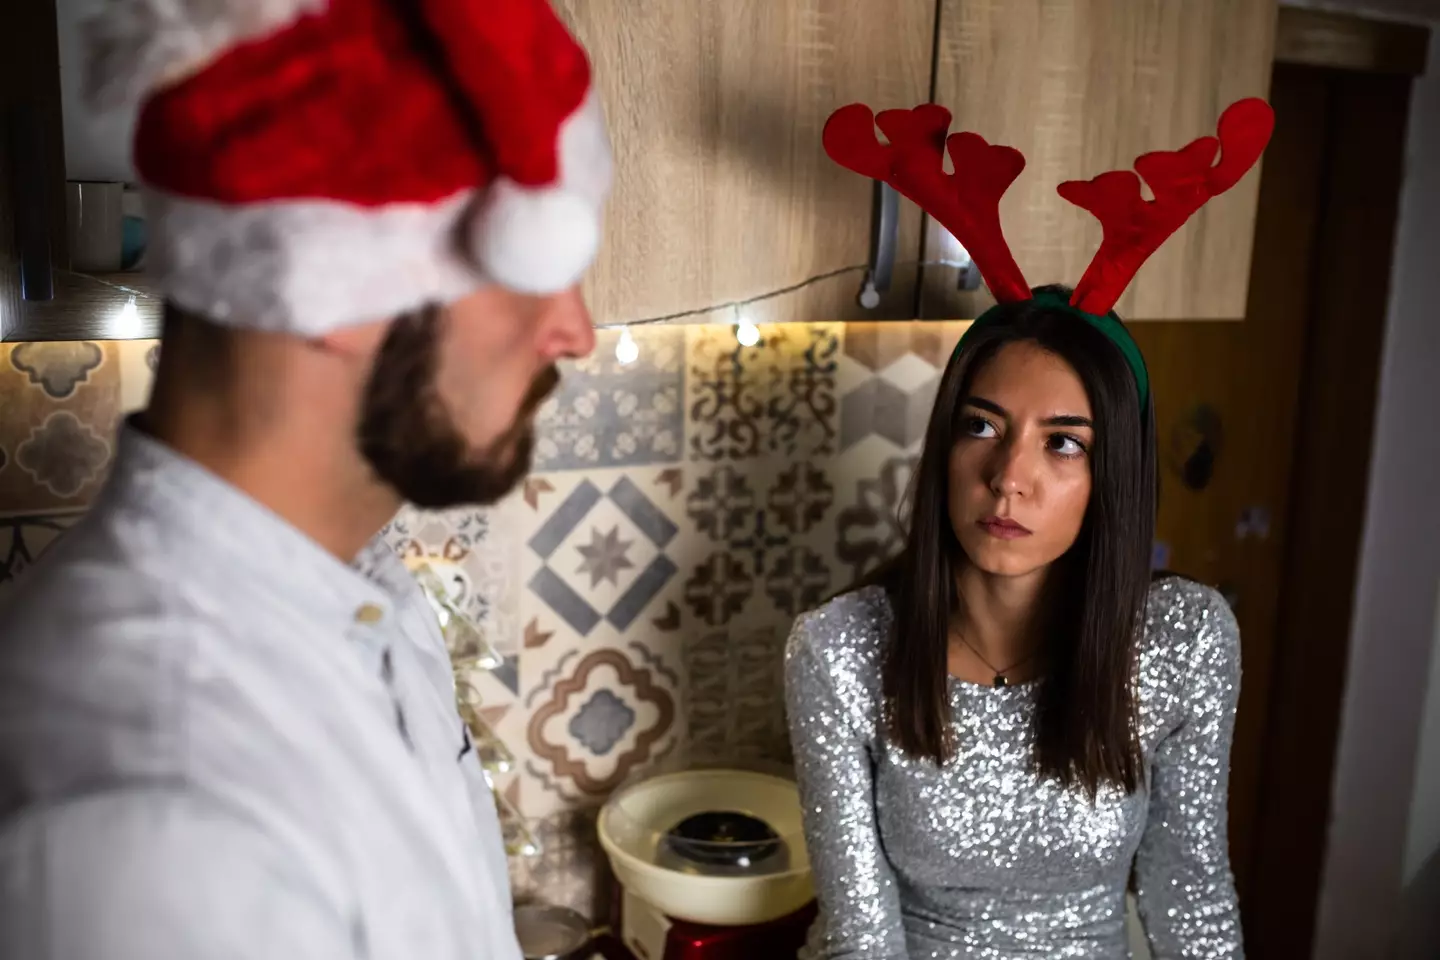 Your partner might be planning on Scrooging you to avoid buying you gifts.